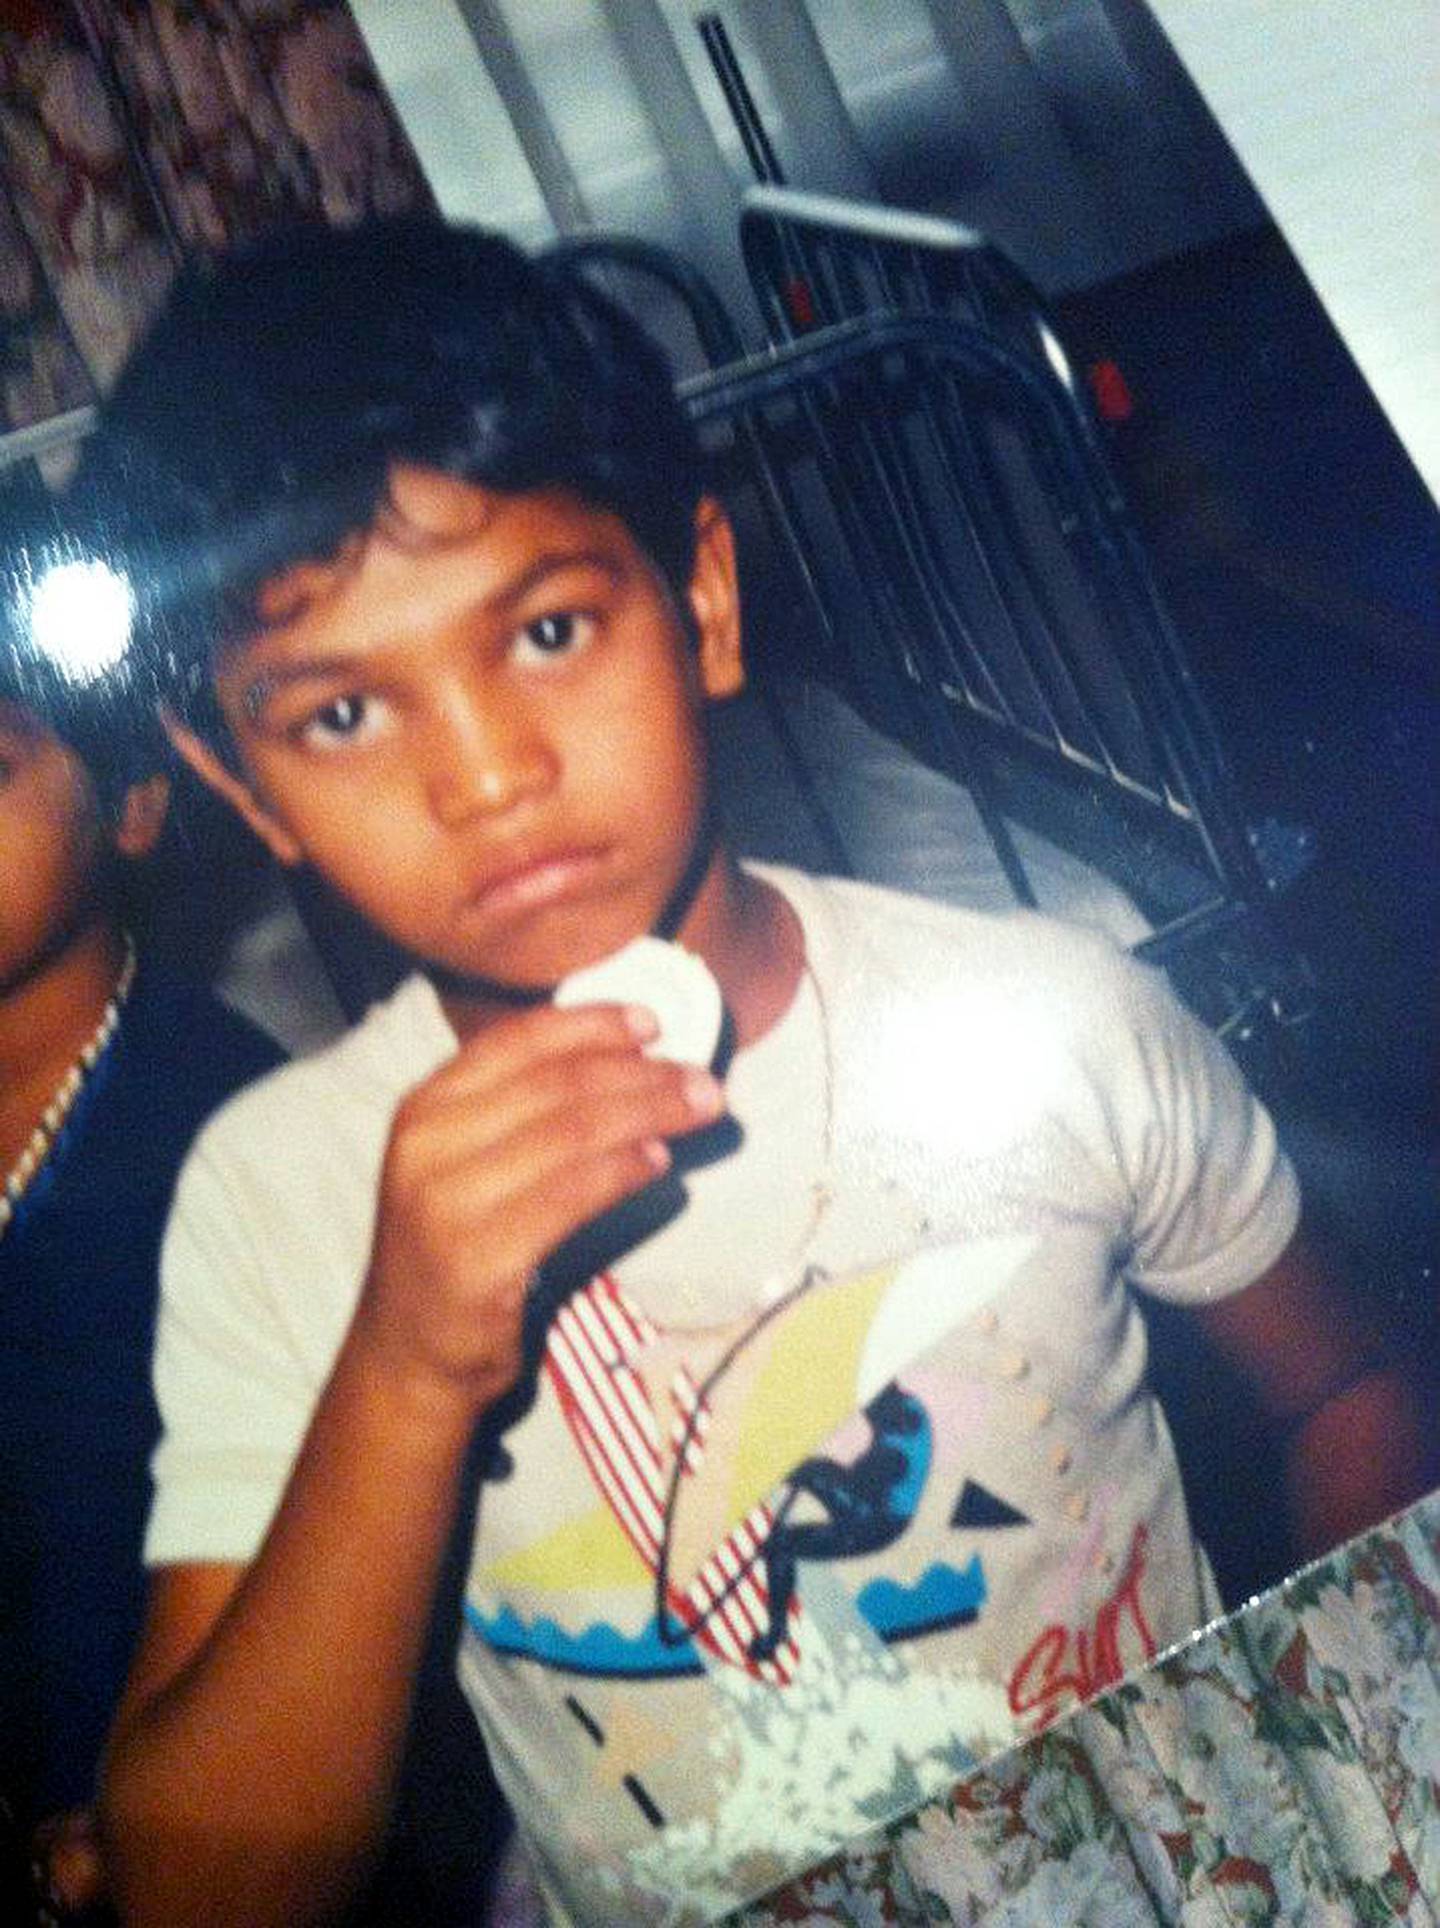 Saroo's photo as a five-year-old which was in his pocket when he got lost. For a Story by SNM Abdi in A&L, March, 2014.CREDIT: Courtesy Saroo Brierley